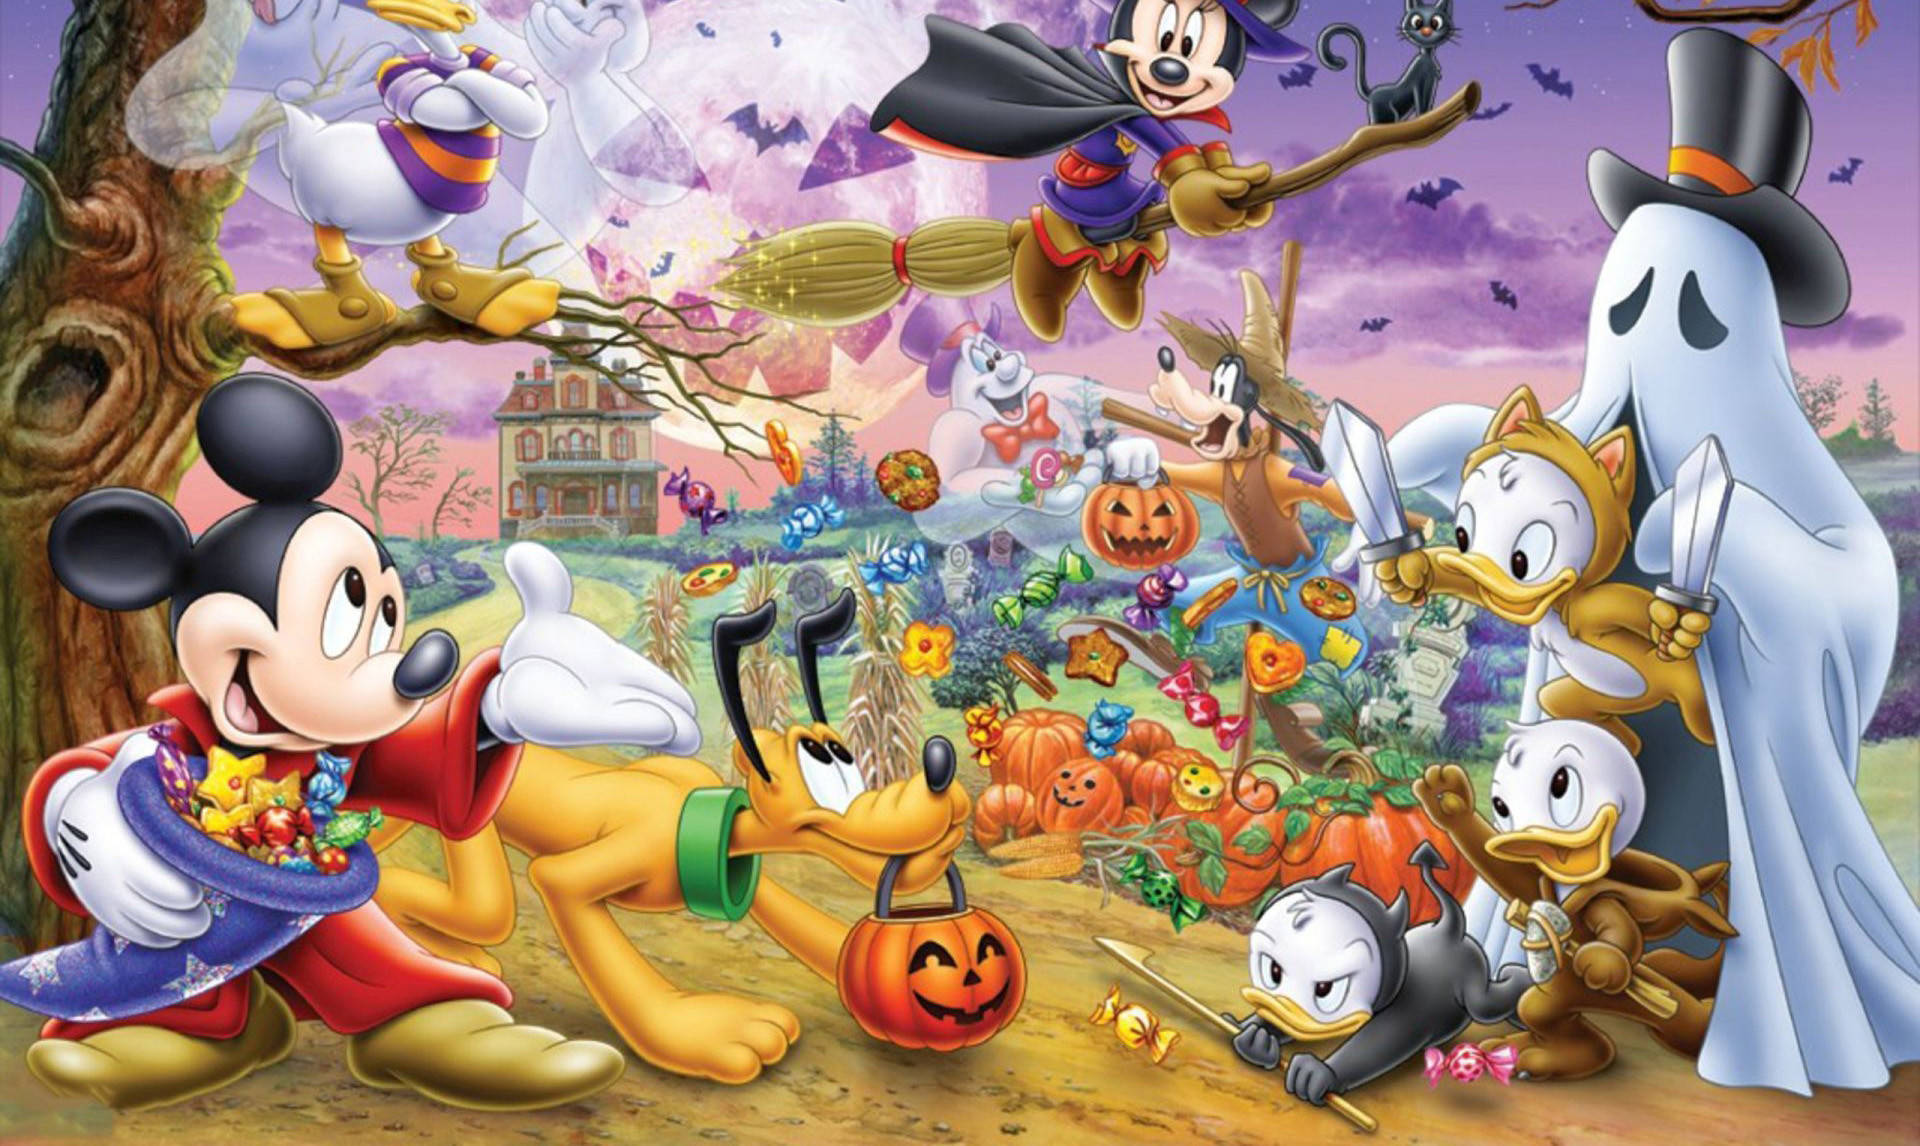 mickey mouse halloween wallpapers